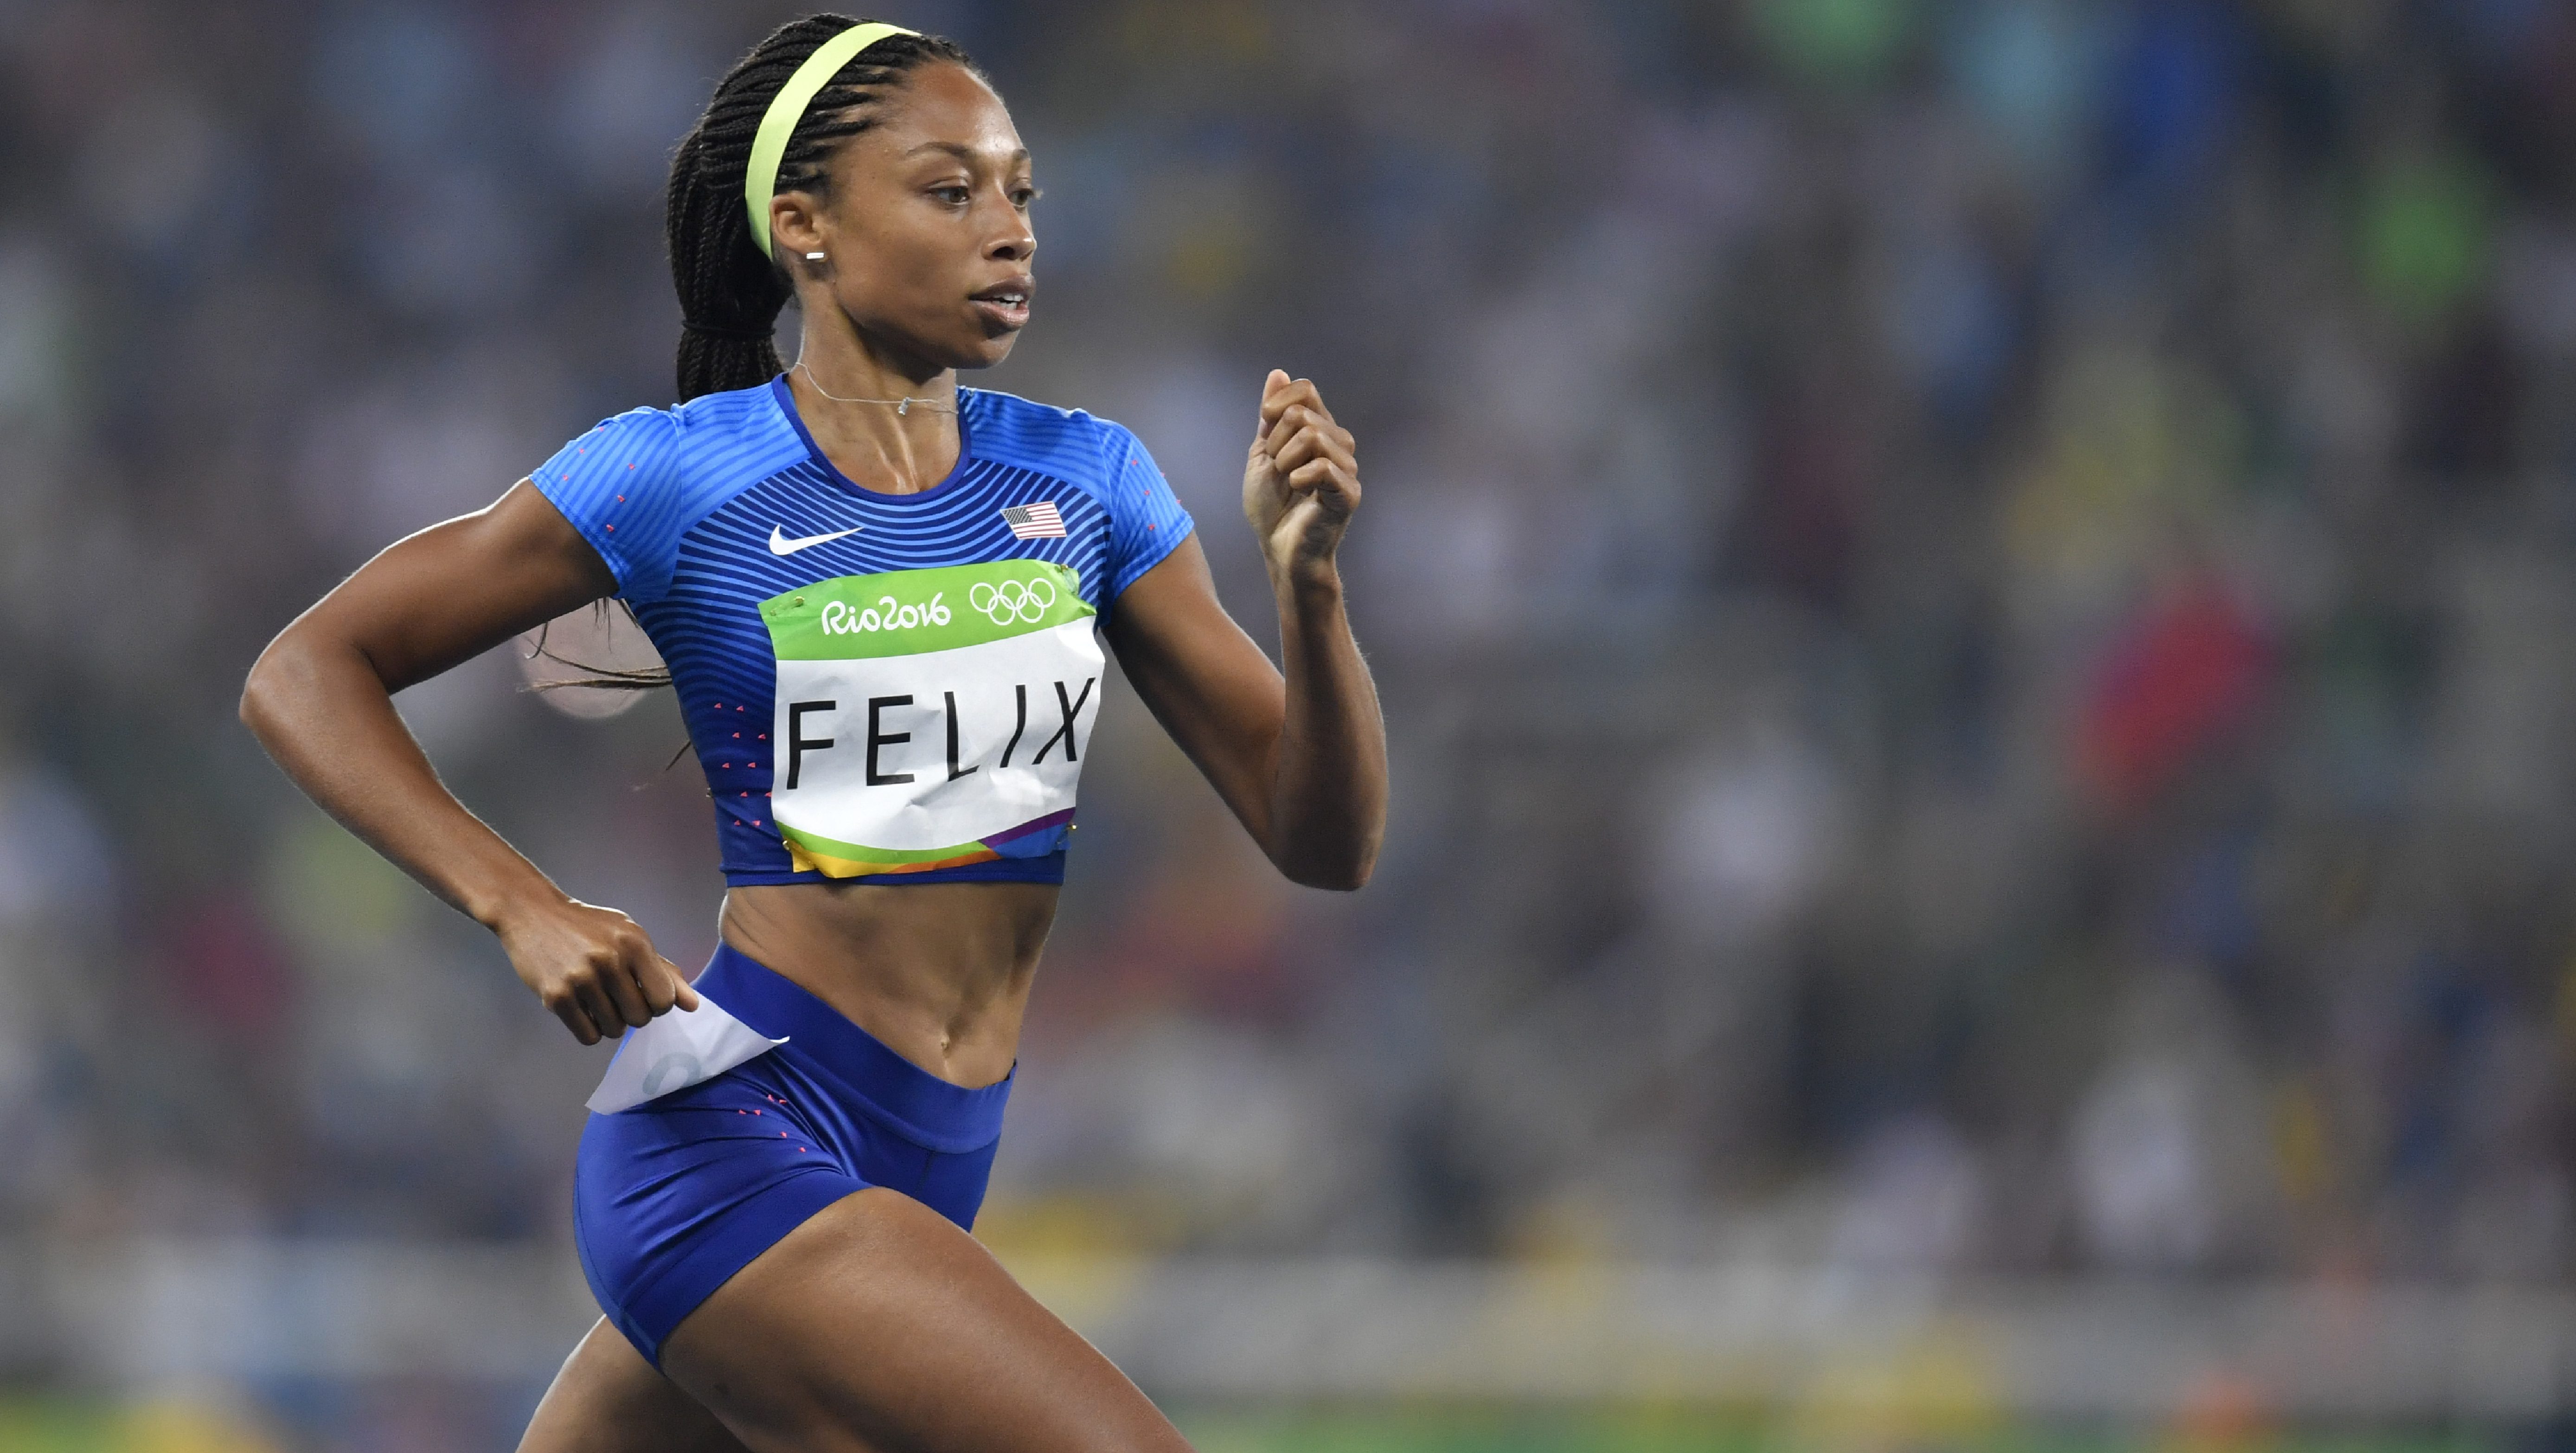 Olympic Women's 400m Live Stream How to Watch Online